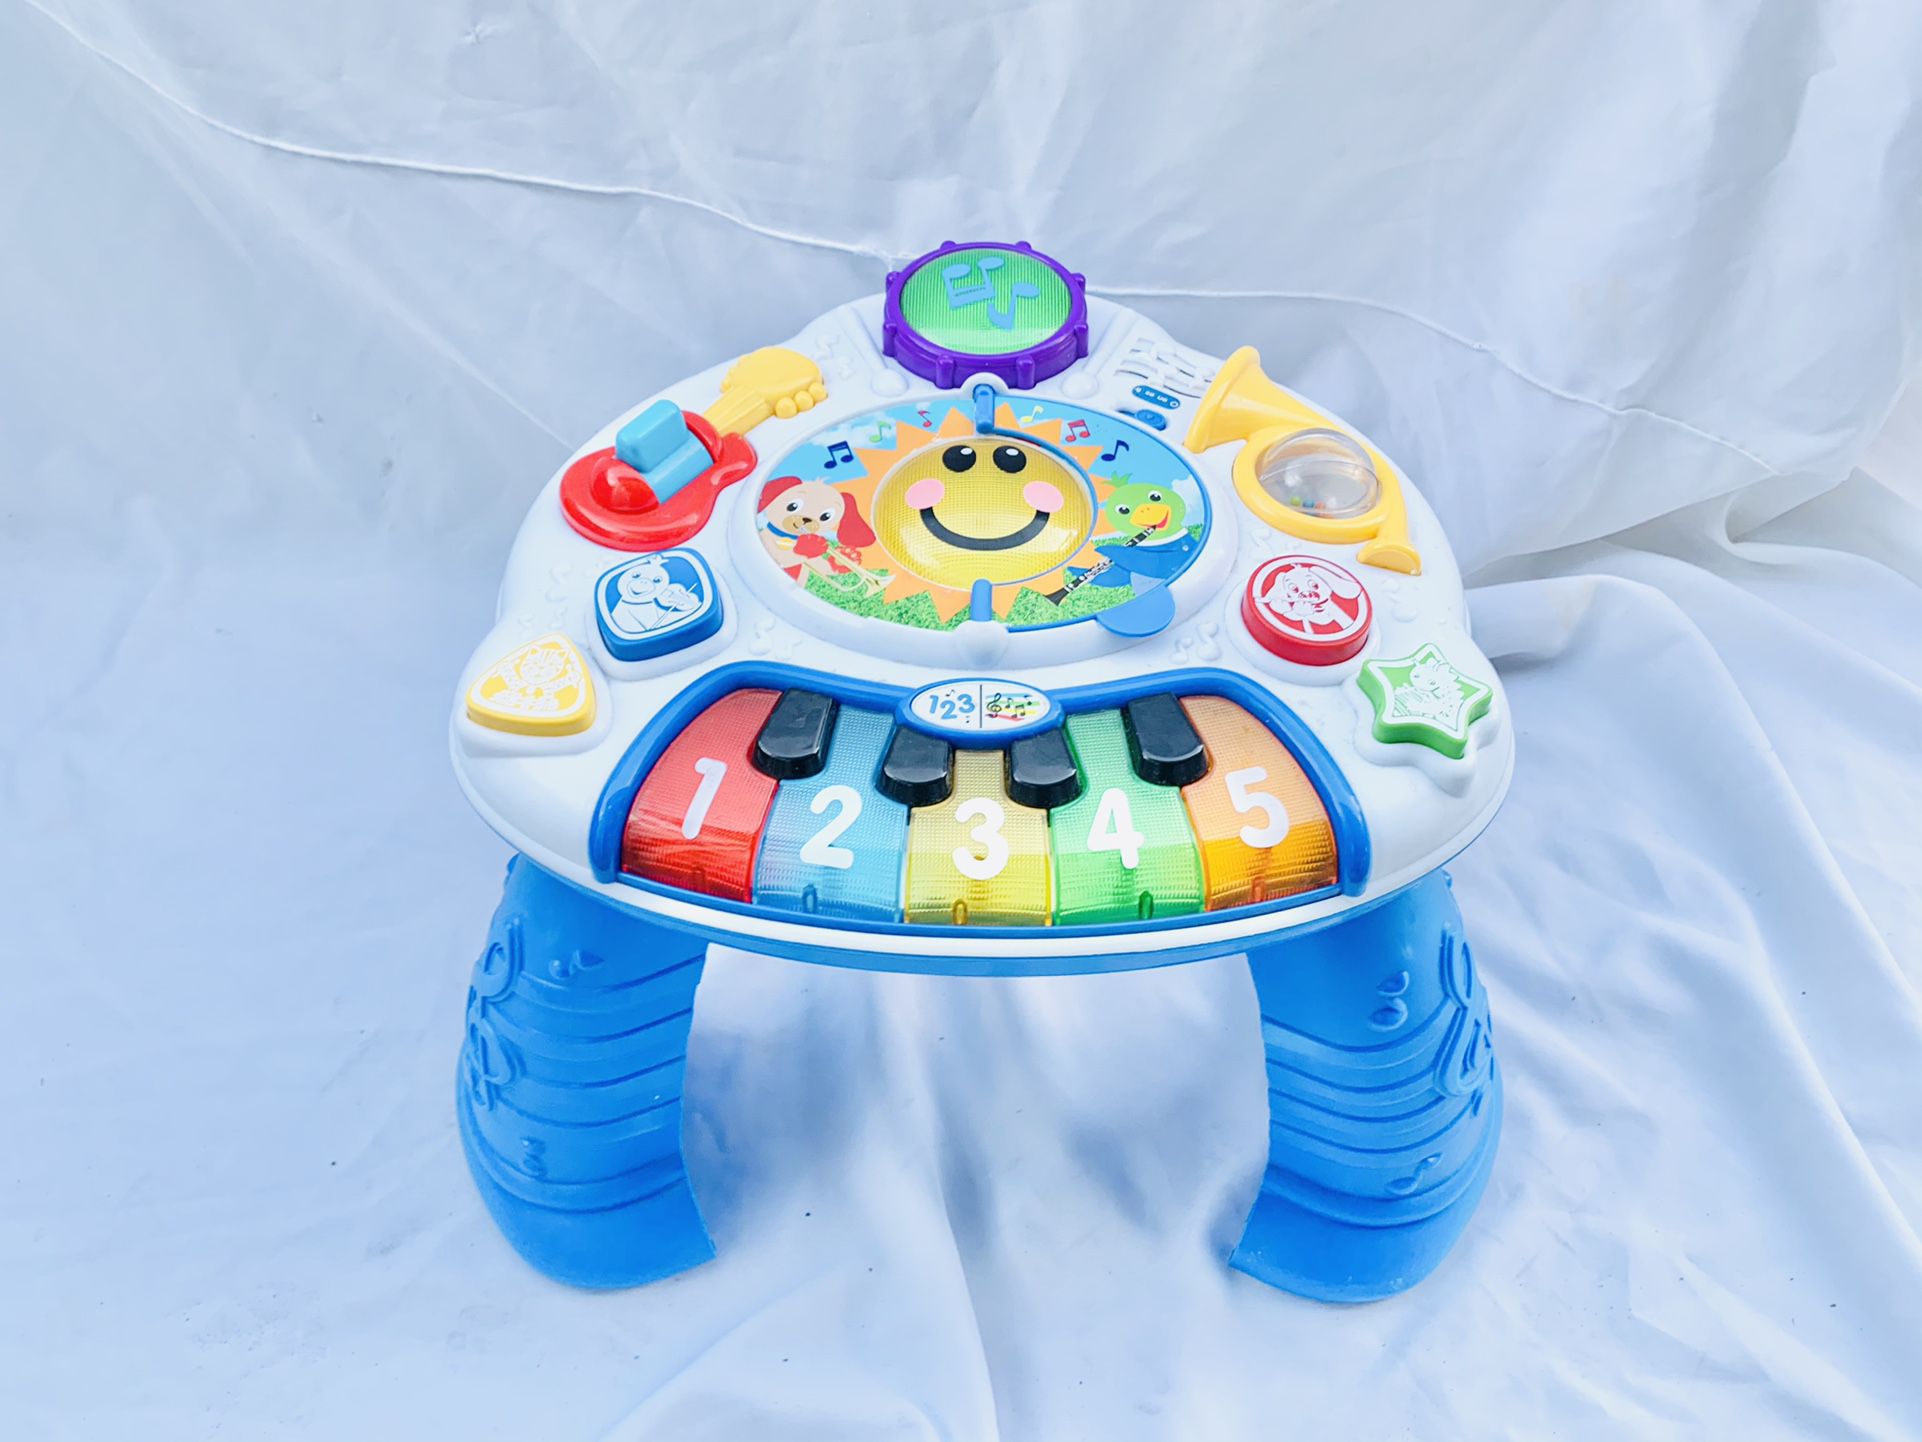 Two Toddler Table And One Activity Learning desk